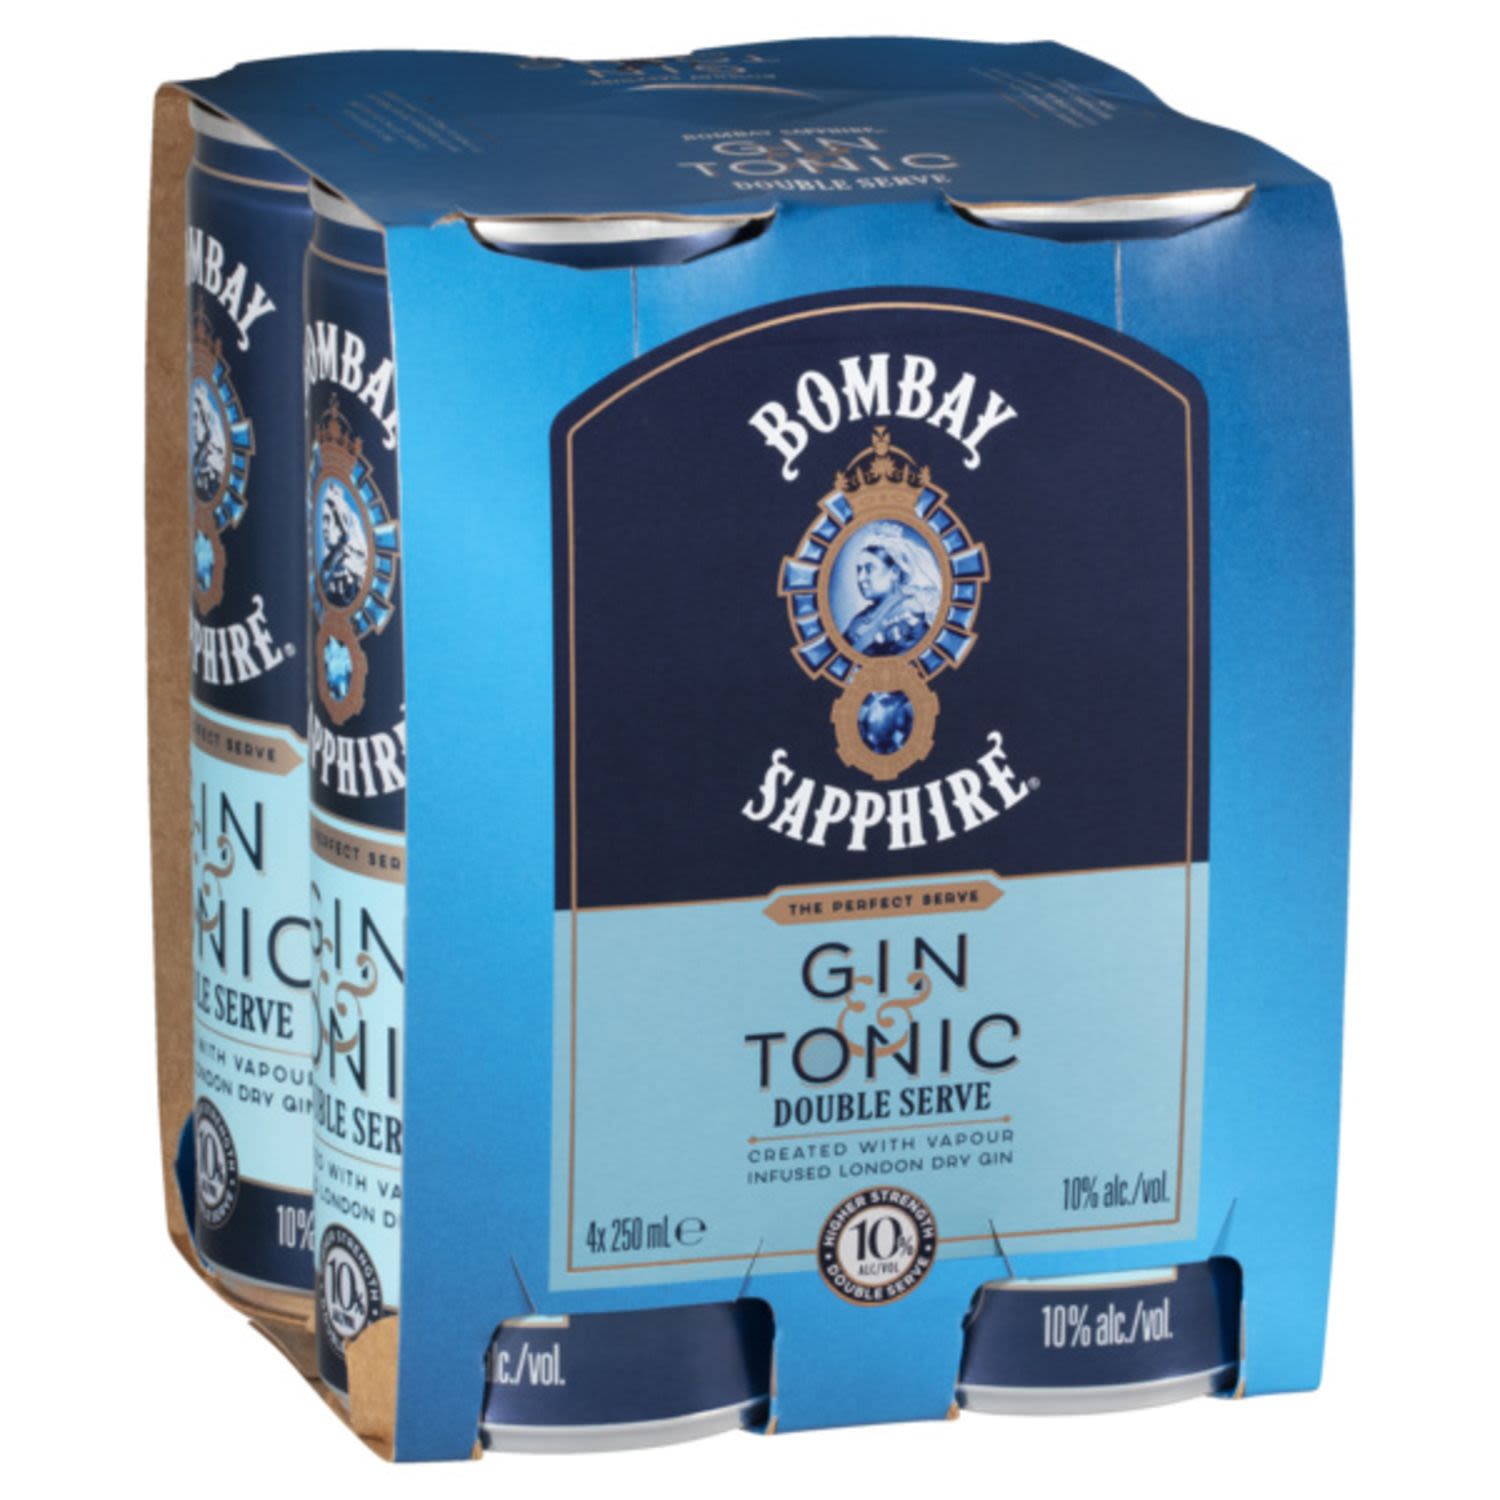 A double serve of Bombay Sapphire gin mixed with just the right amount of tonic to deliver a refreshing citrus taste that can be enjoyed wherever you are.<br /> <br />Alcohol Volume: 10.00%<br /><br />Pack Format: 4 Pack<br /><br />Standard Drinks: 2<br /><br />Pack Type: Can<br />